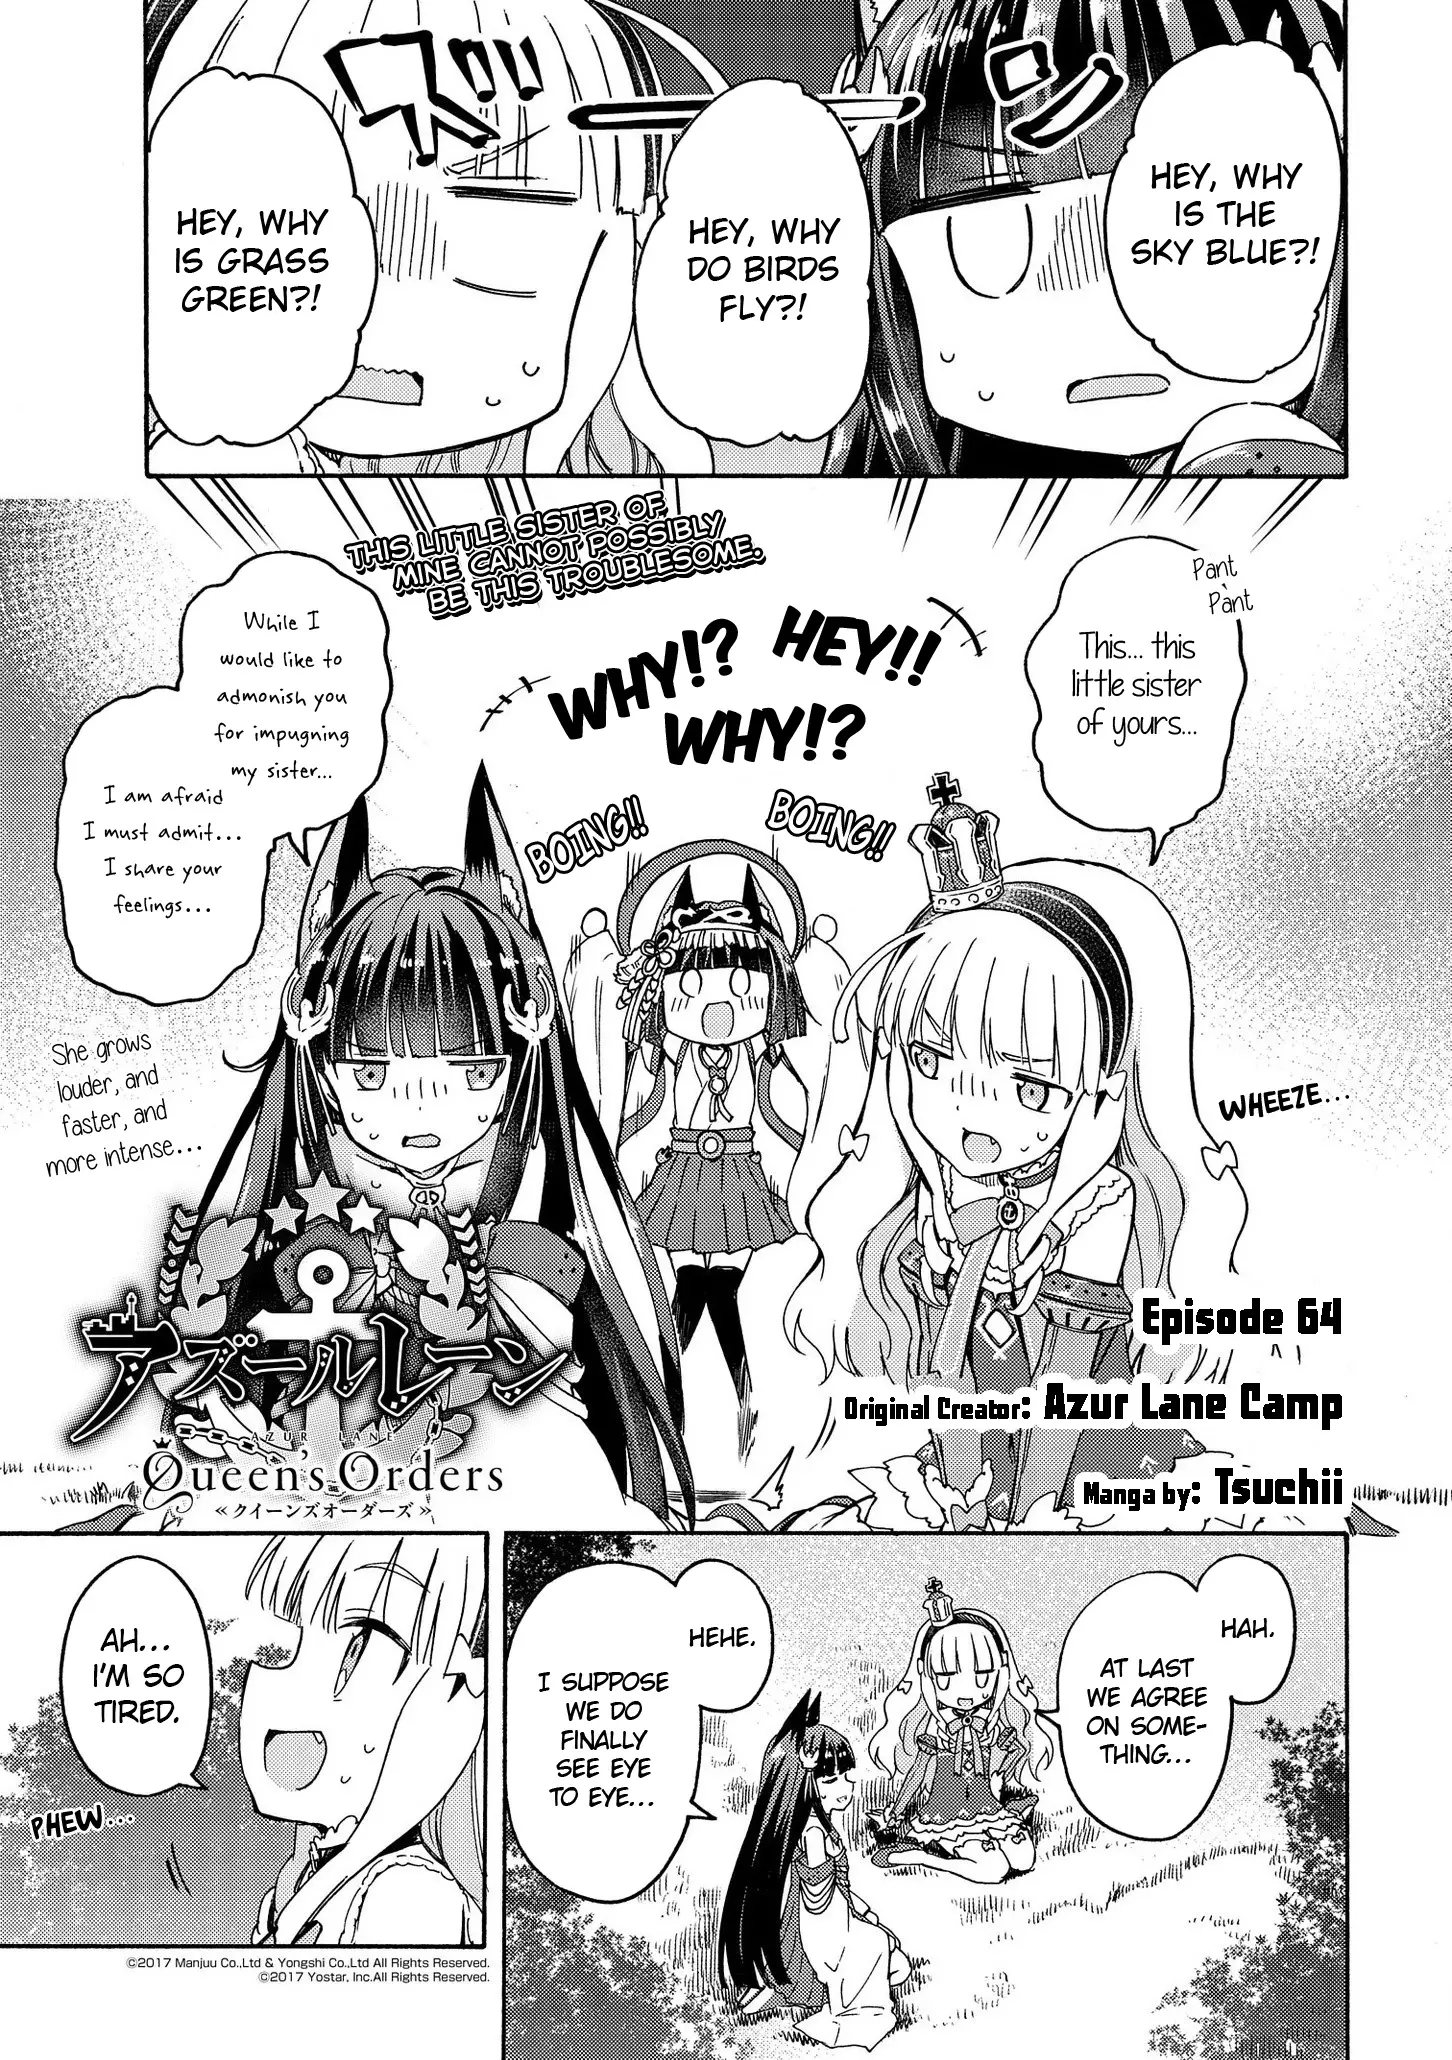 Azur Lane: Queen's Orders - 64 page 1-dff796a5